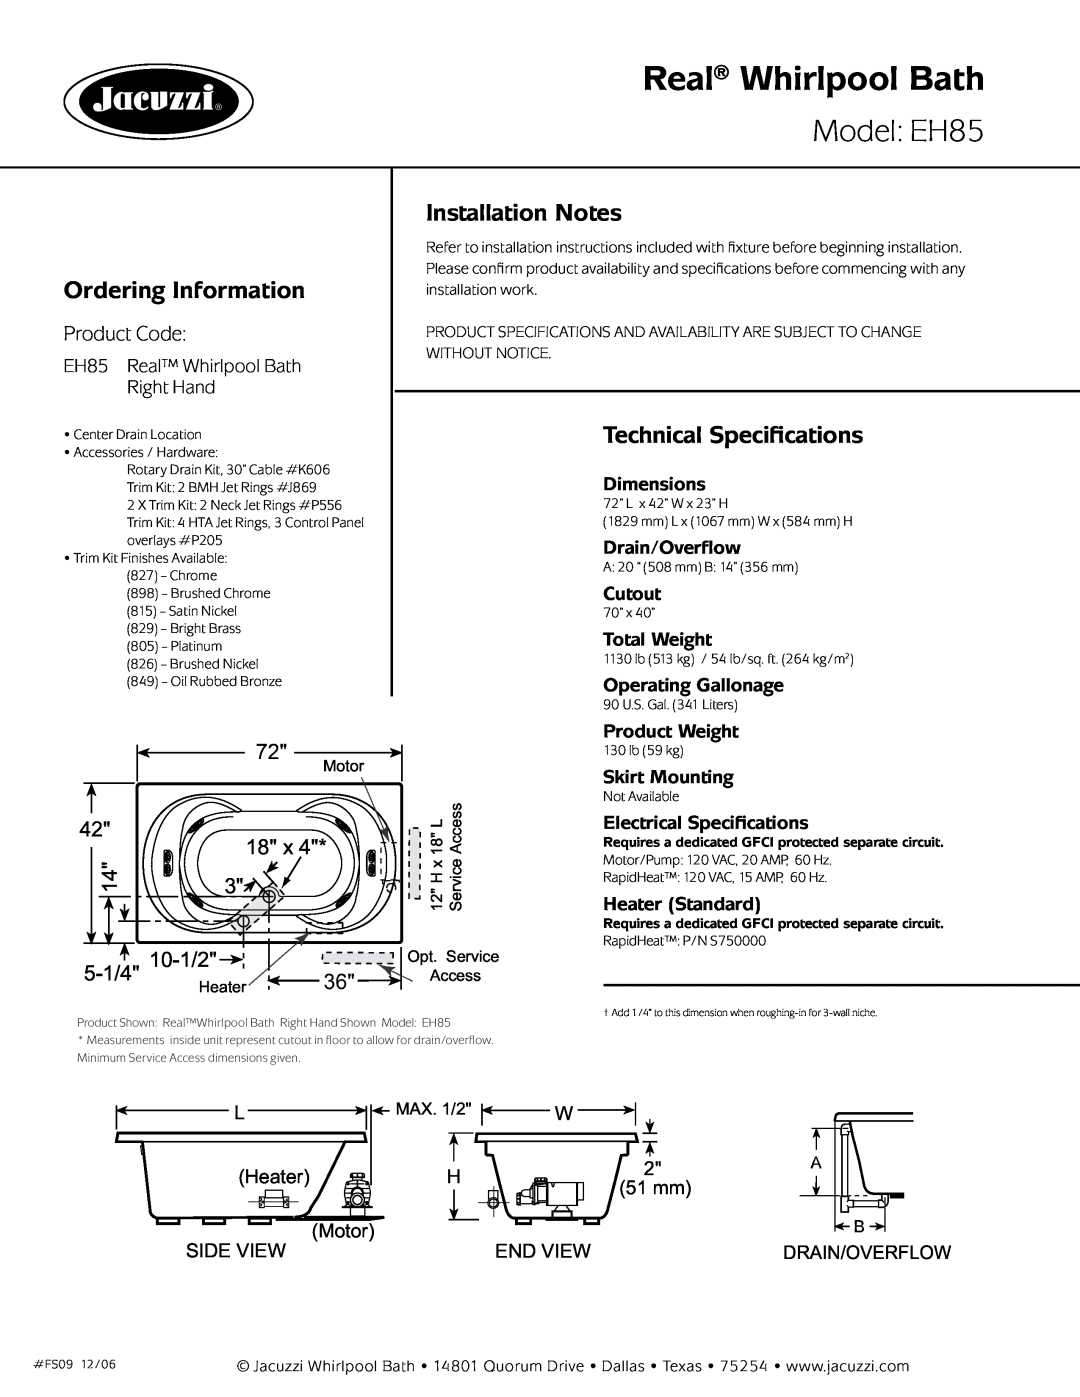 Jacuzzi Real Whirlpool Bath, Model EH85, Ordering Information, Installation Notes, Technical Specifications, Dimensions 